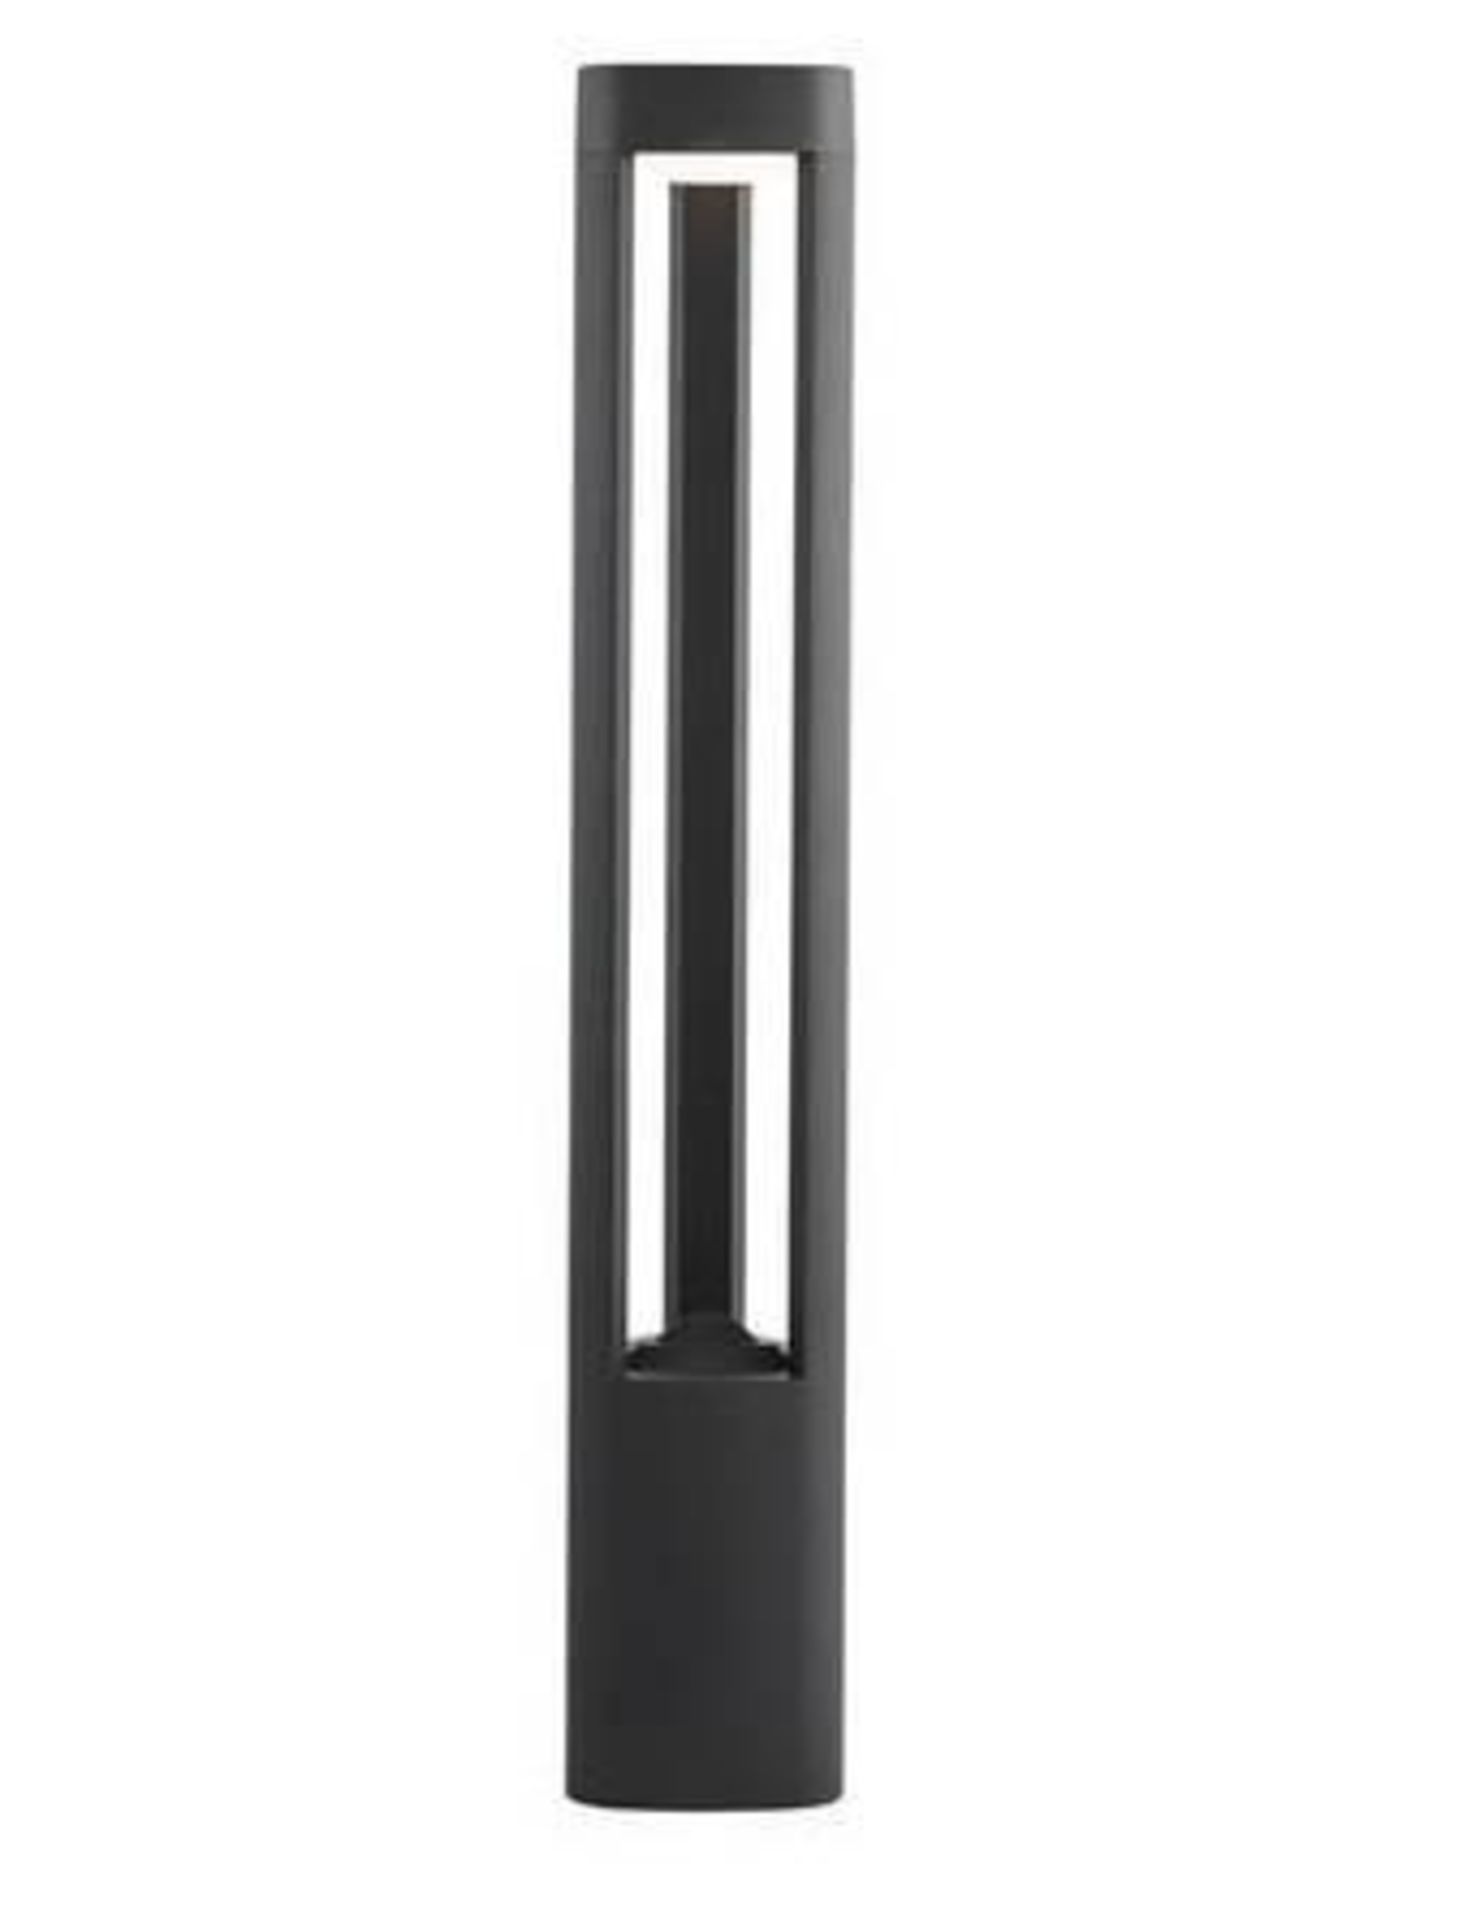 1 x Searchlight - LED Outdoor Post Lamp - CL323 - Ref: NO1 1005-800GY - WH1 AB4 - Location: Altrinch - Image 2 of 2